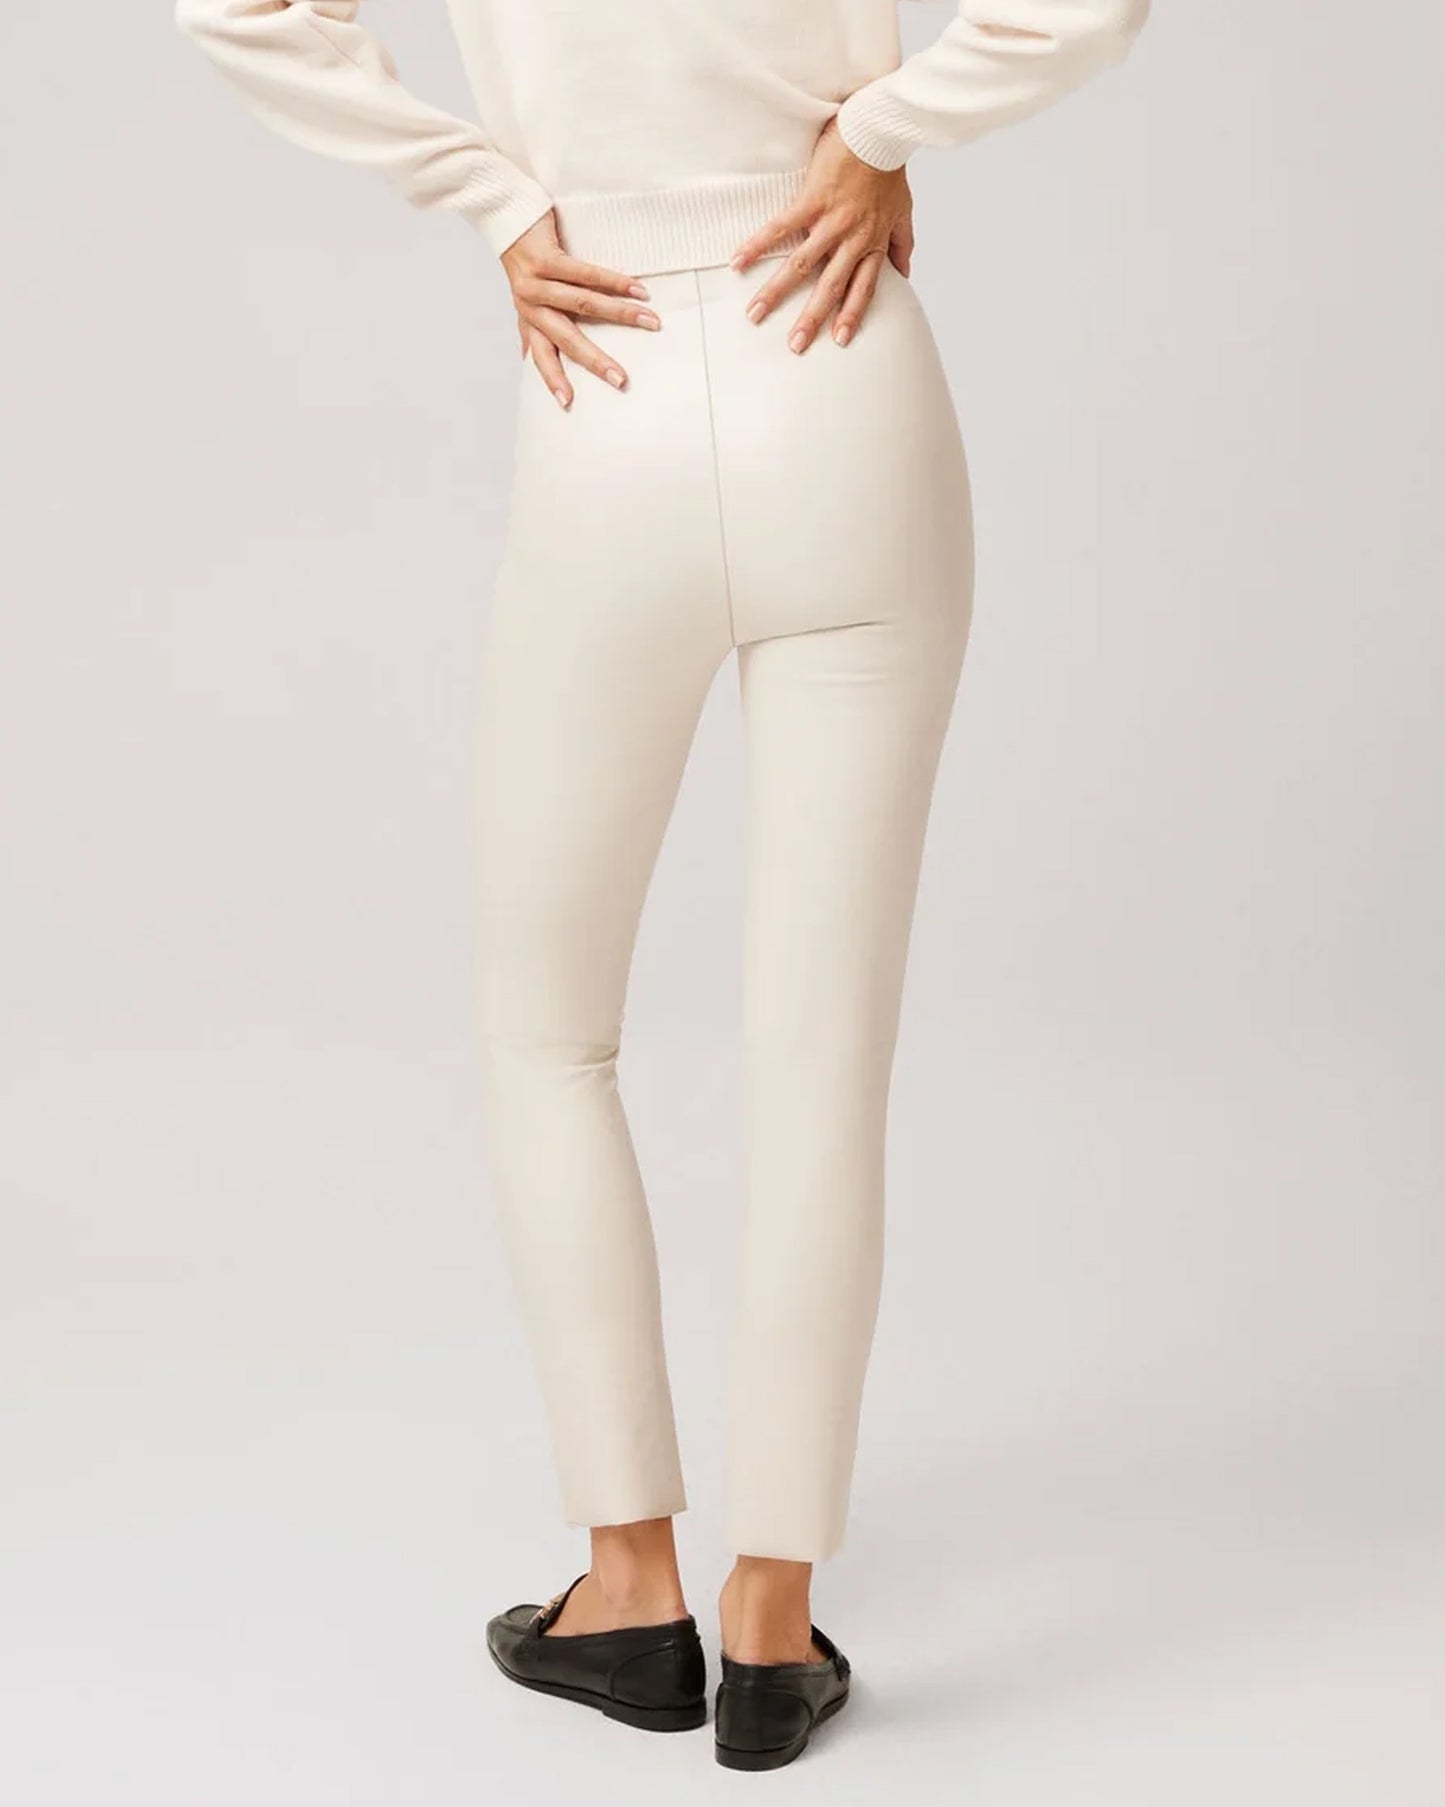 Ysabel Mora 70295 Faux Leather Slit Leggings - Tight fit faux leather thermal cream coloured leggings. 